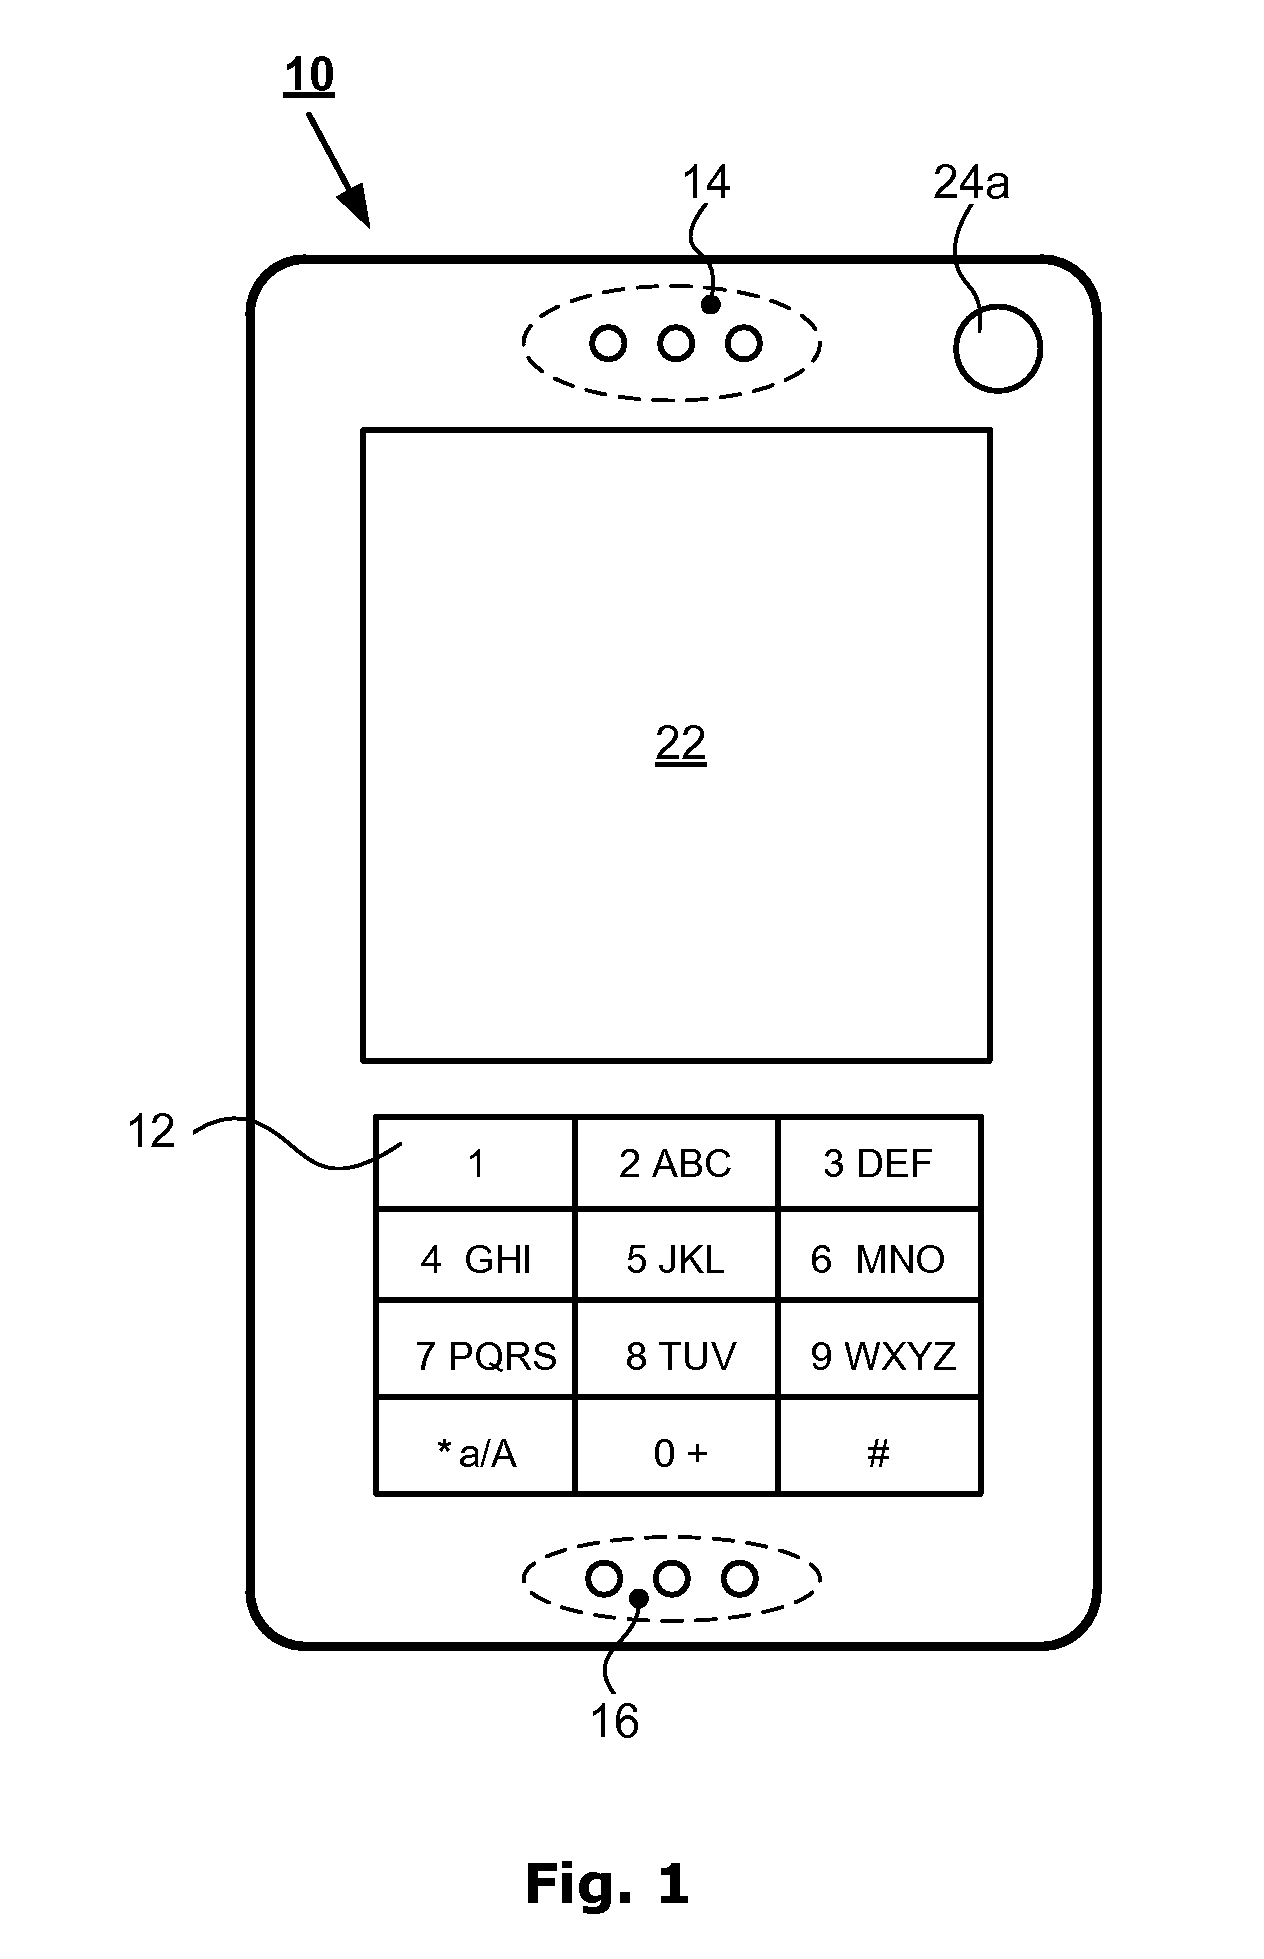 Luminance control for a display